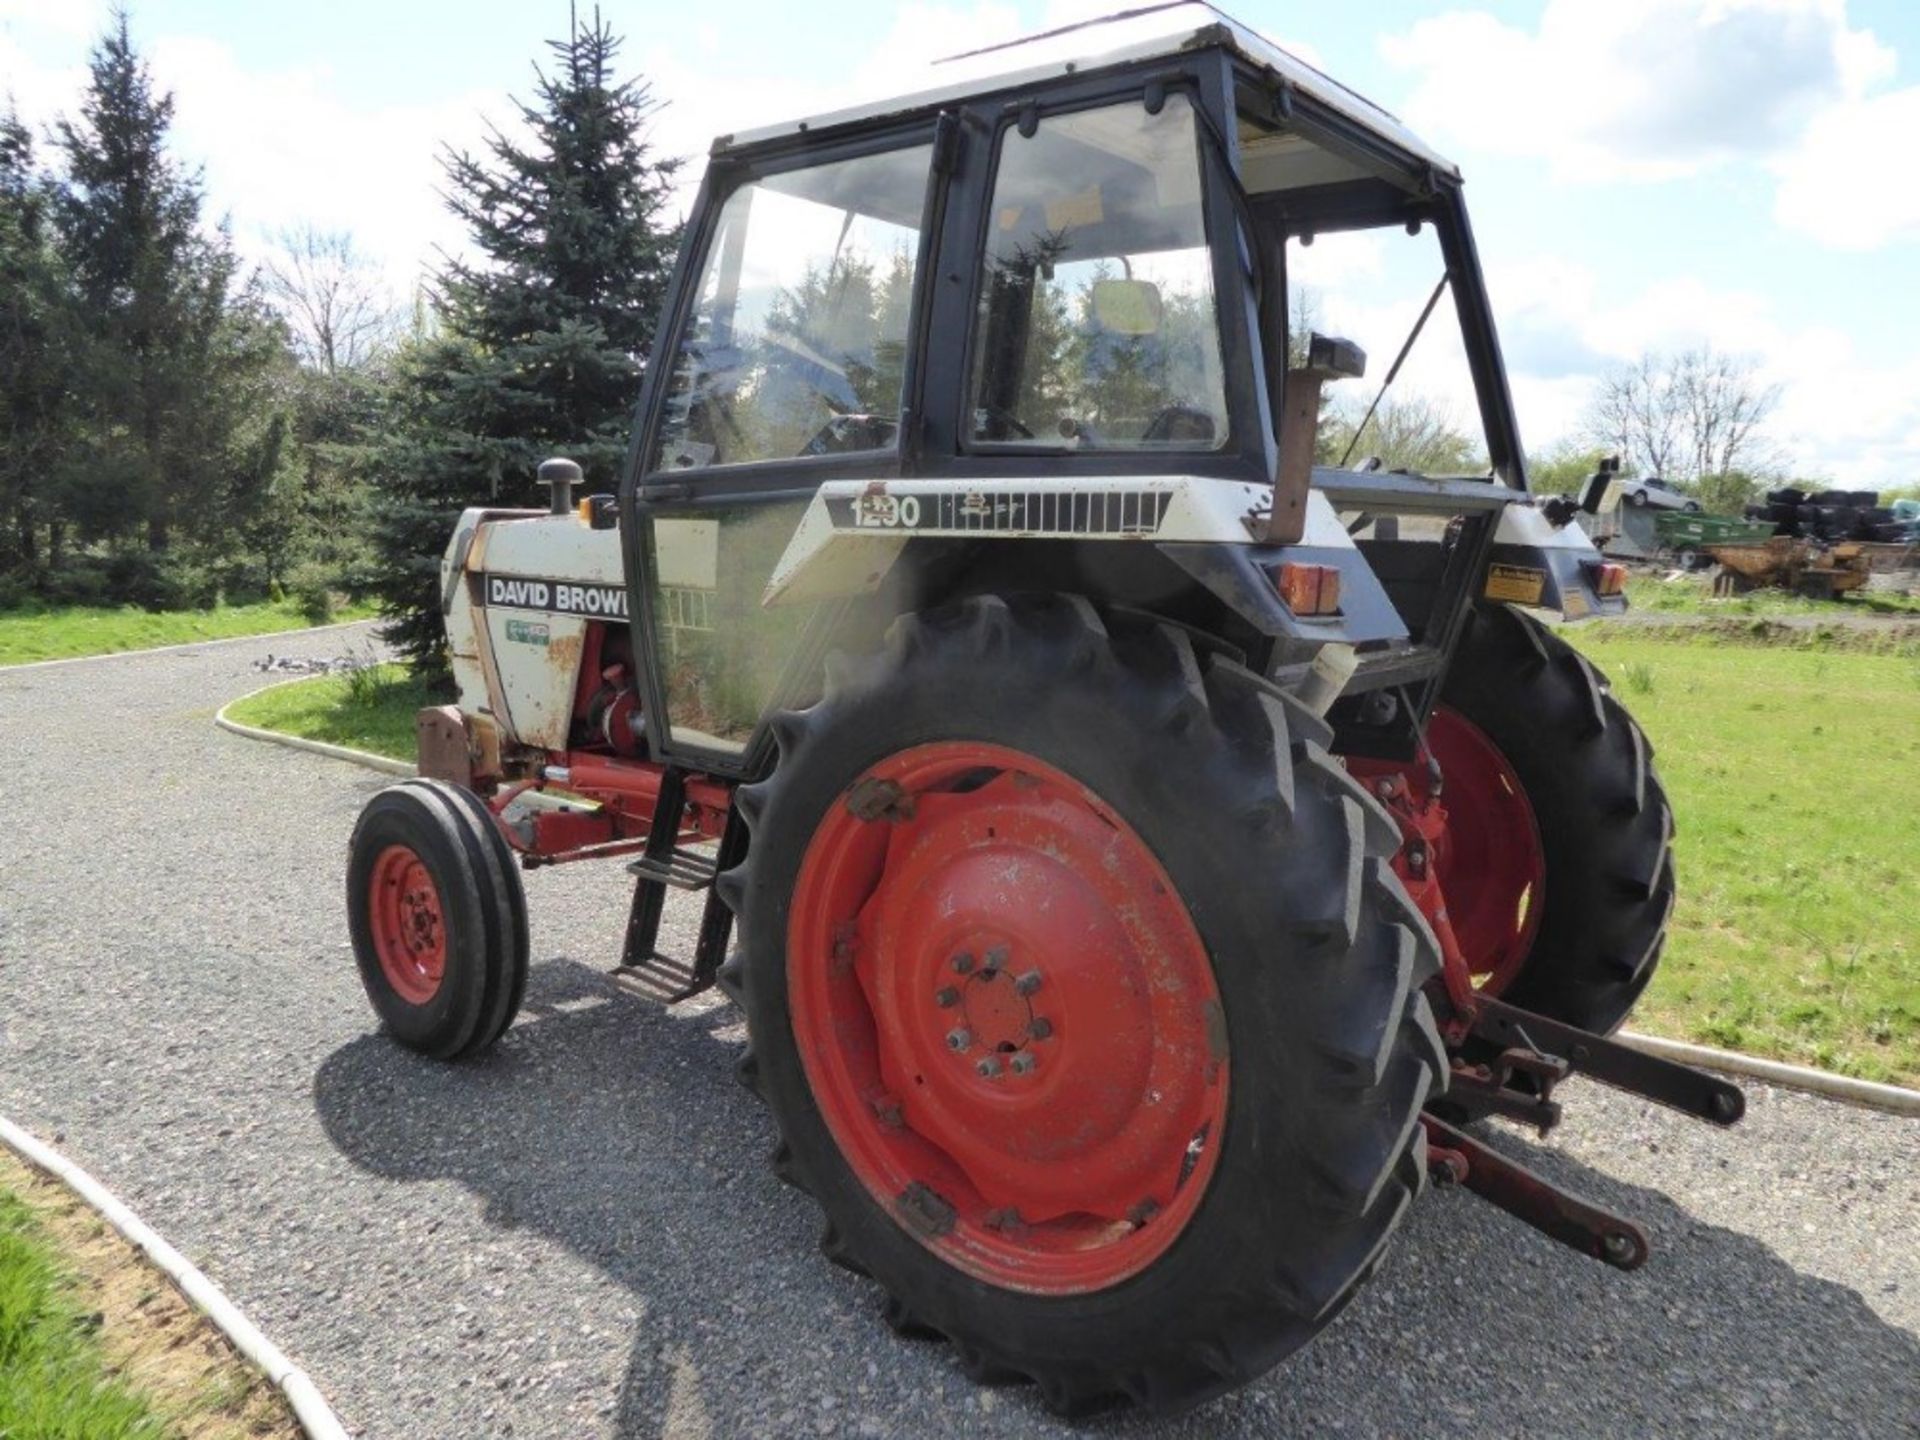 David Brown Case 1290 2wd Tractor - Image 4 of 5